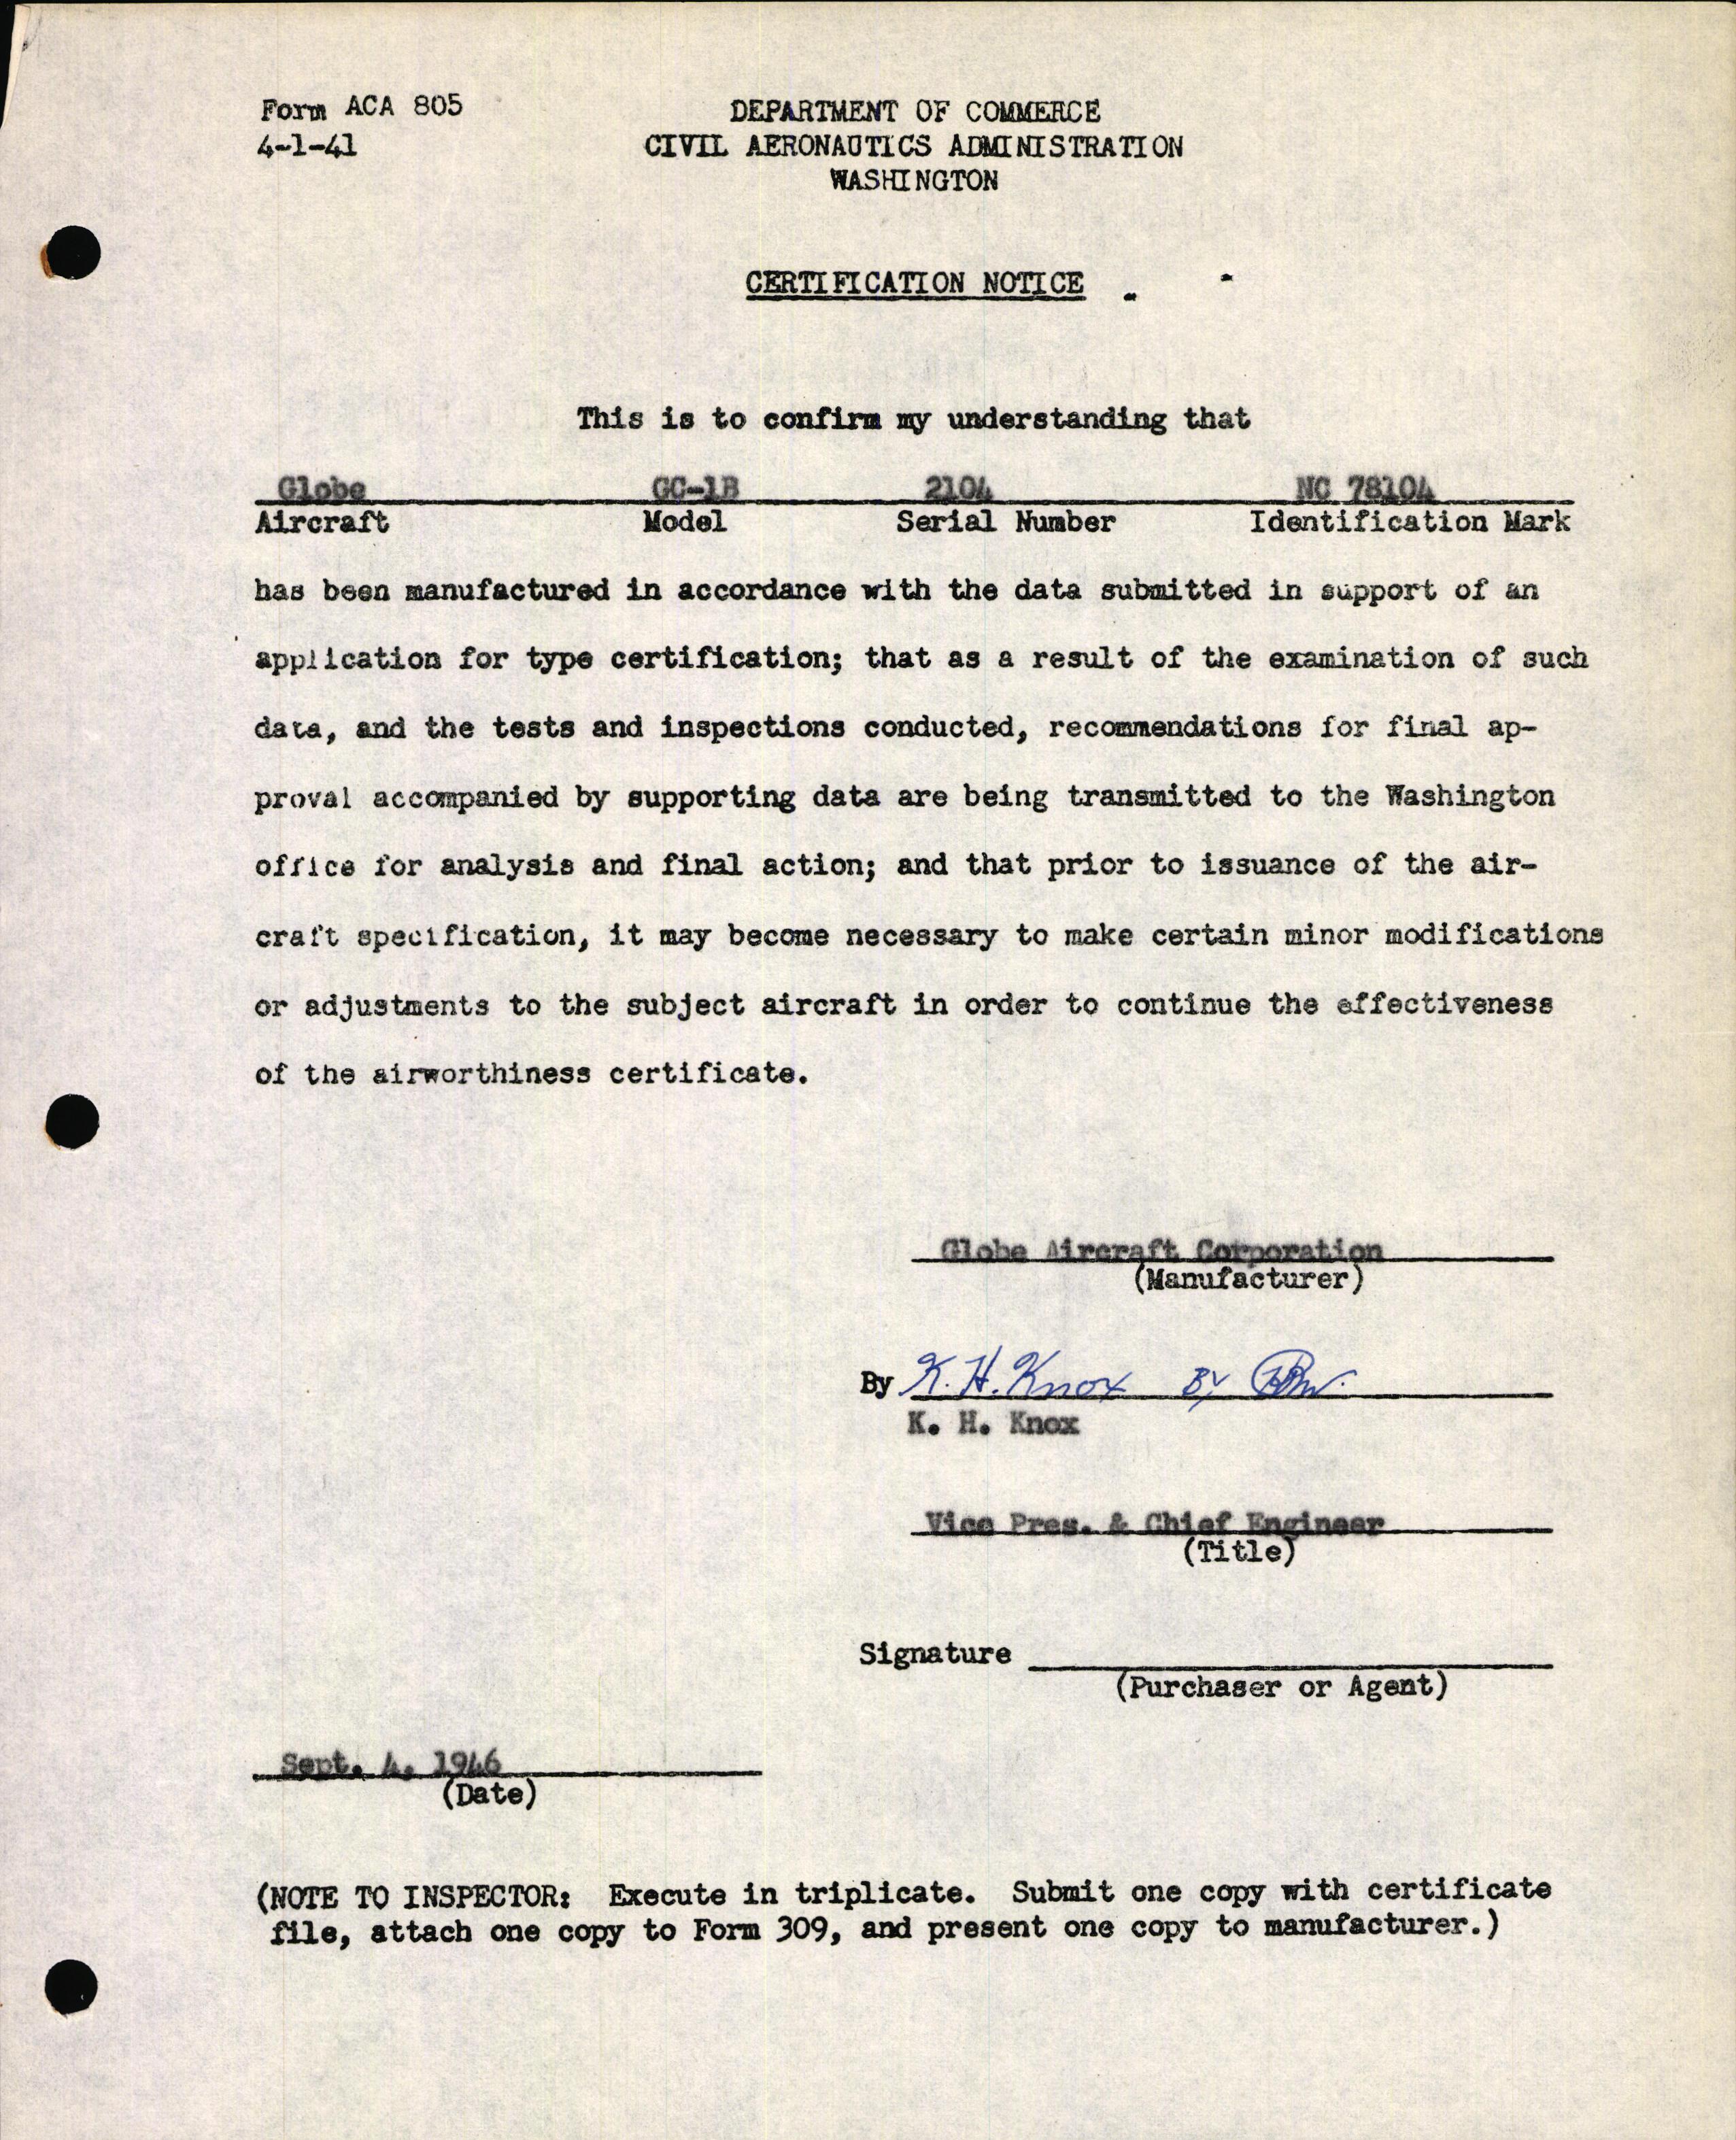 Sample page 3 from AirCorps Library document: Technical Information for Serial Number 2104